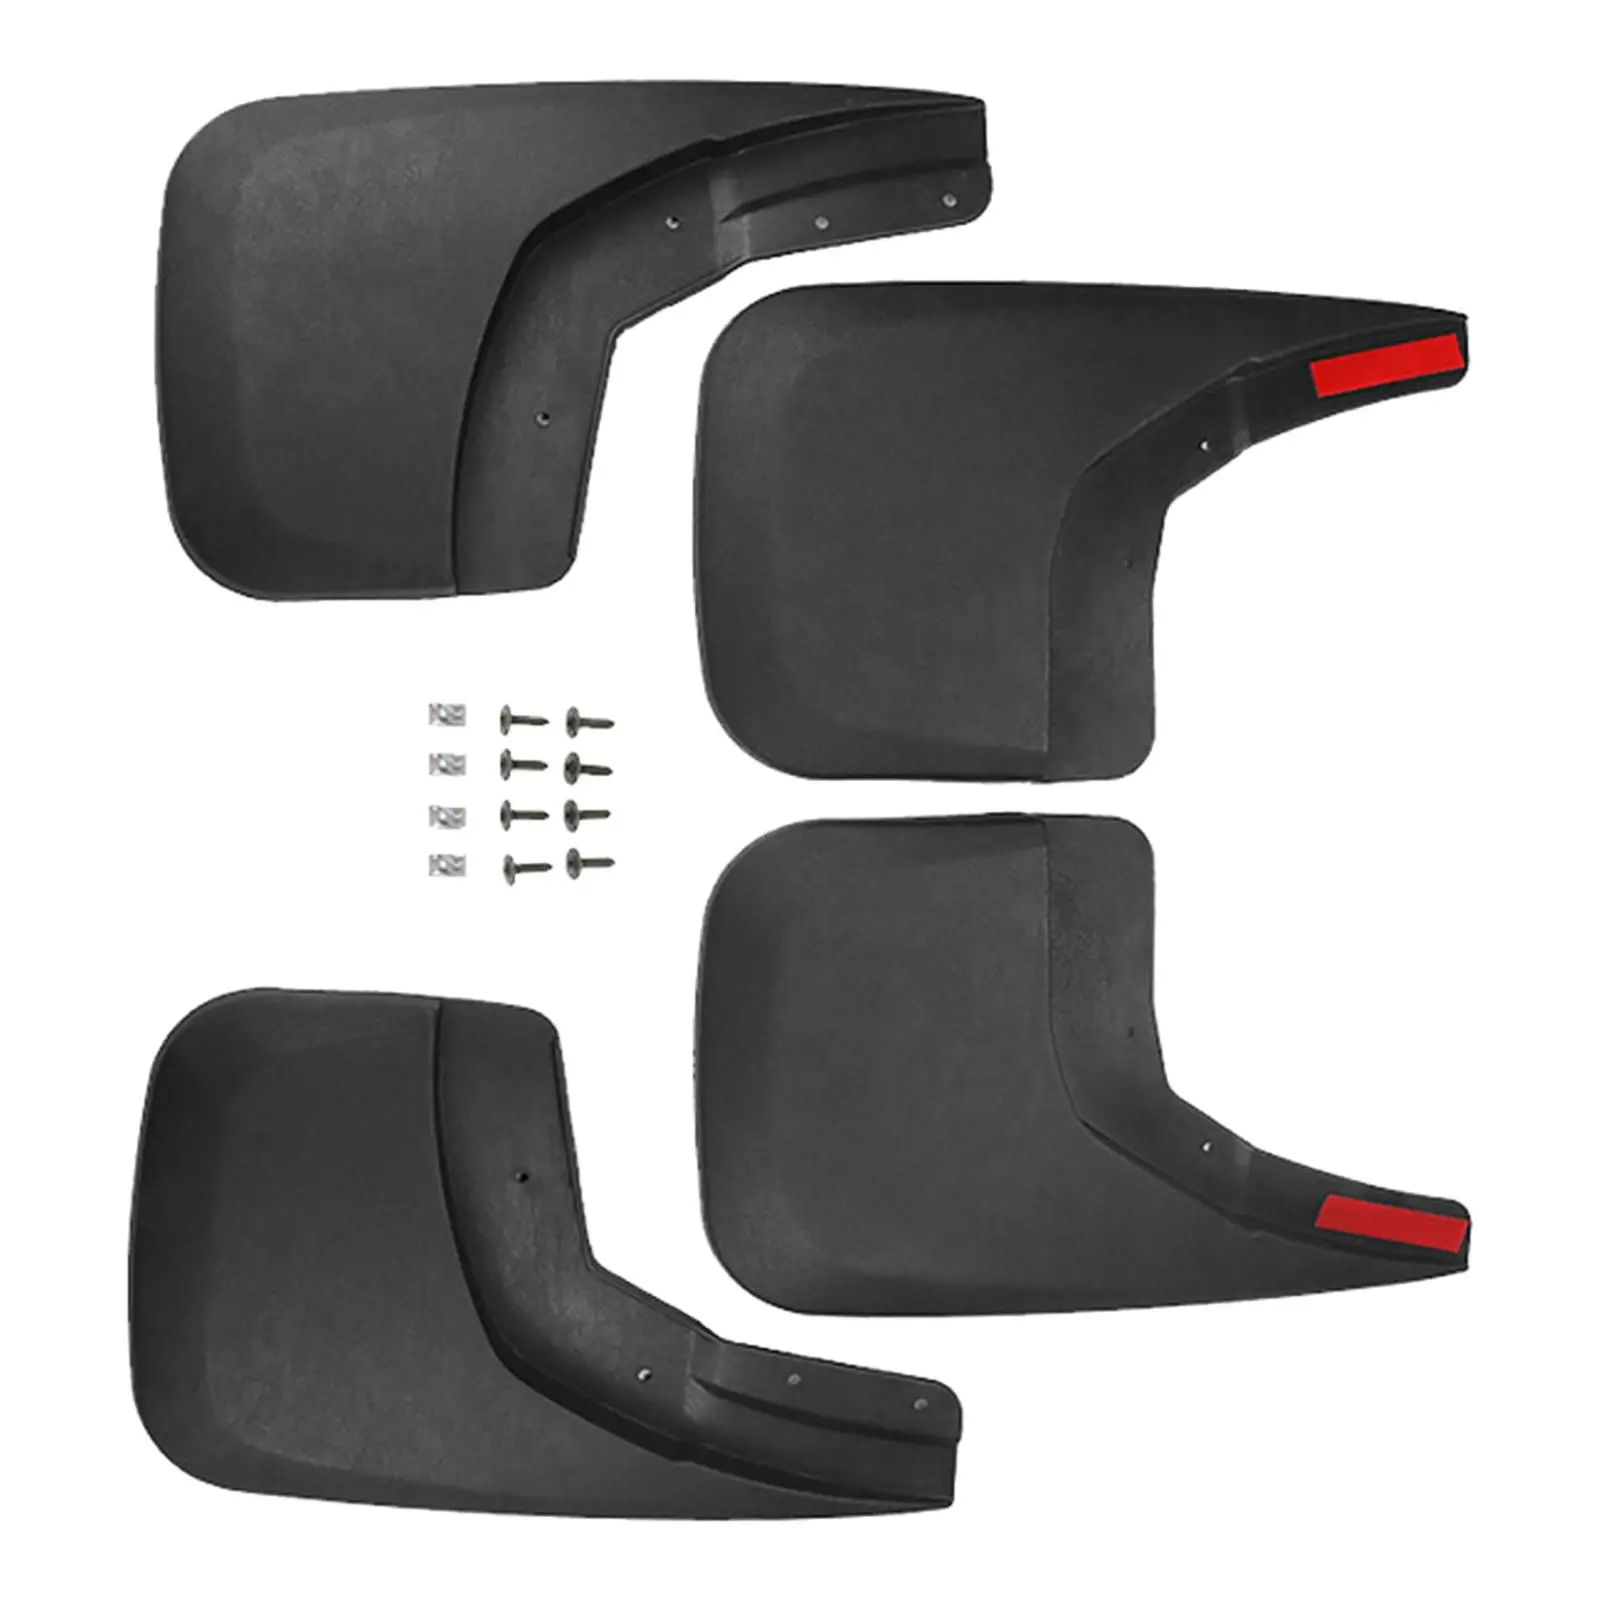 Mud Guard Set 56886 Molded Guards Fit for Silveado 1500 2014-18